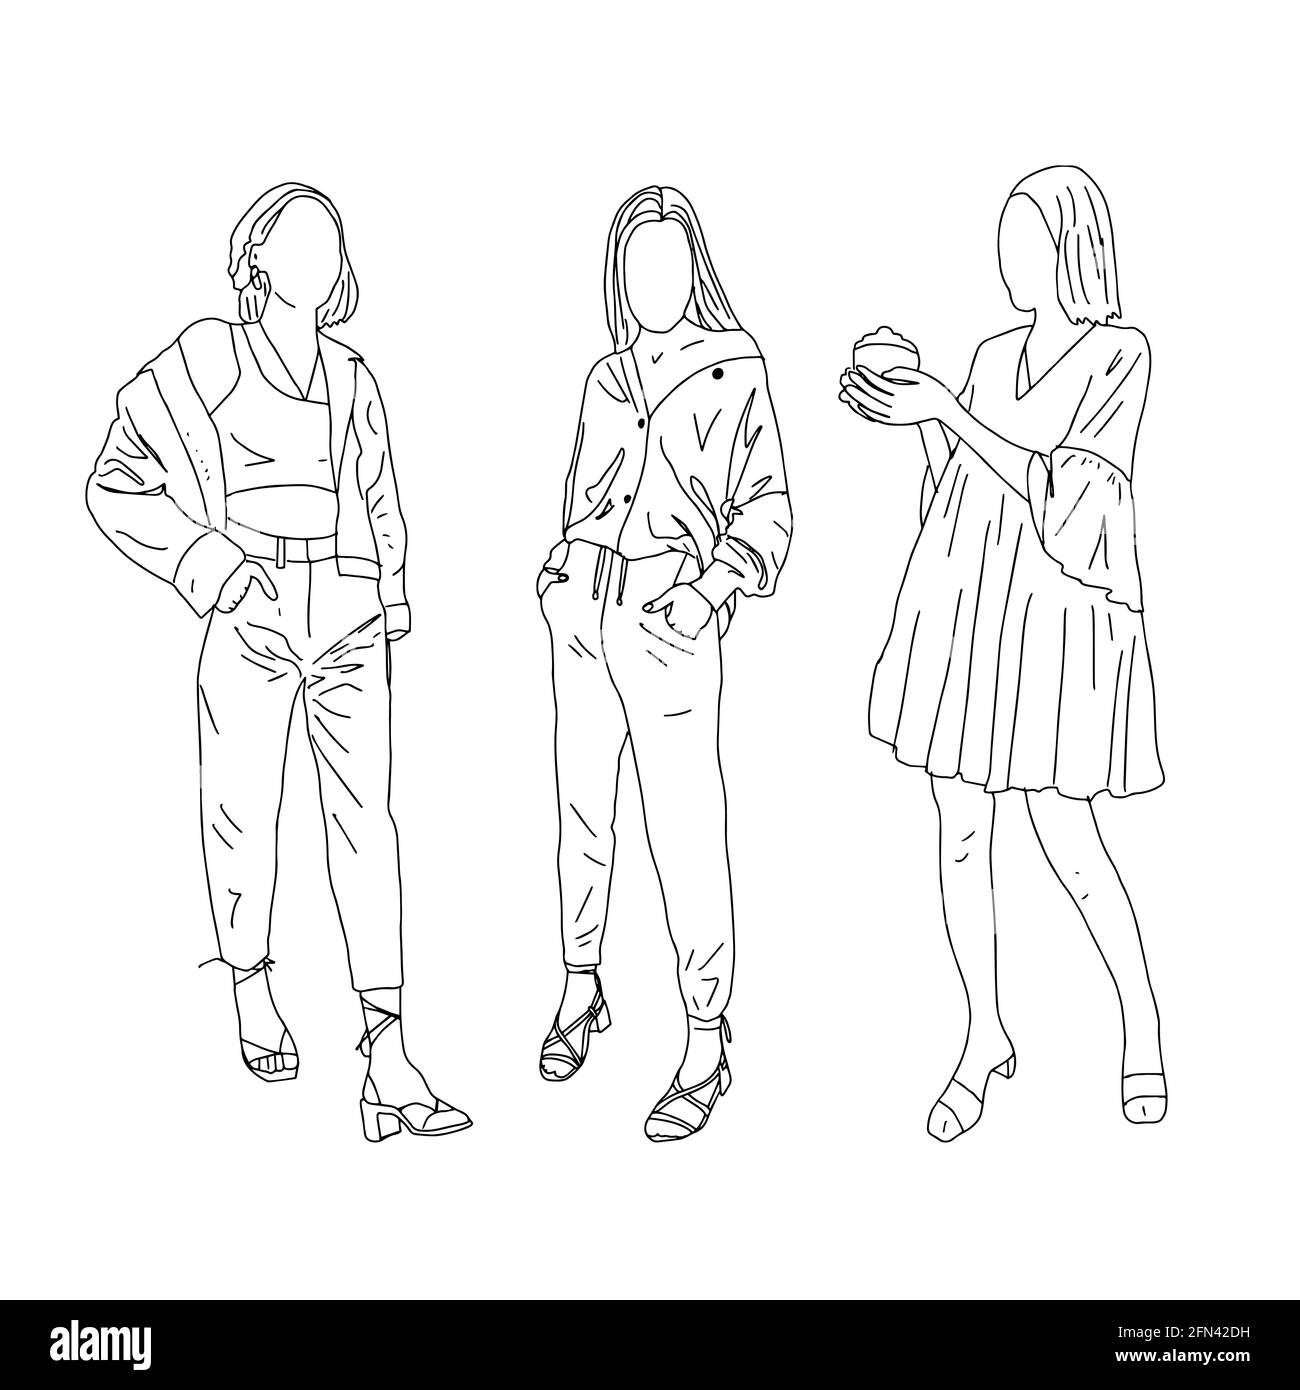 Three girls in different styles of clothing. Linear style. Vector illustration. Stock Vector